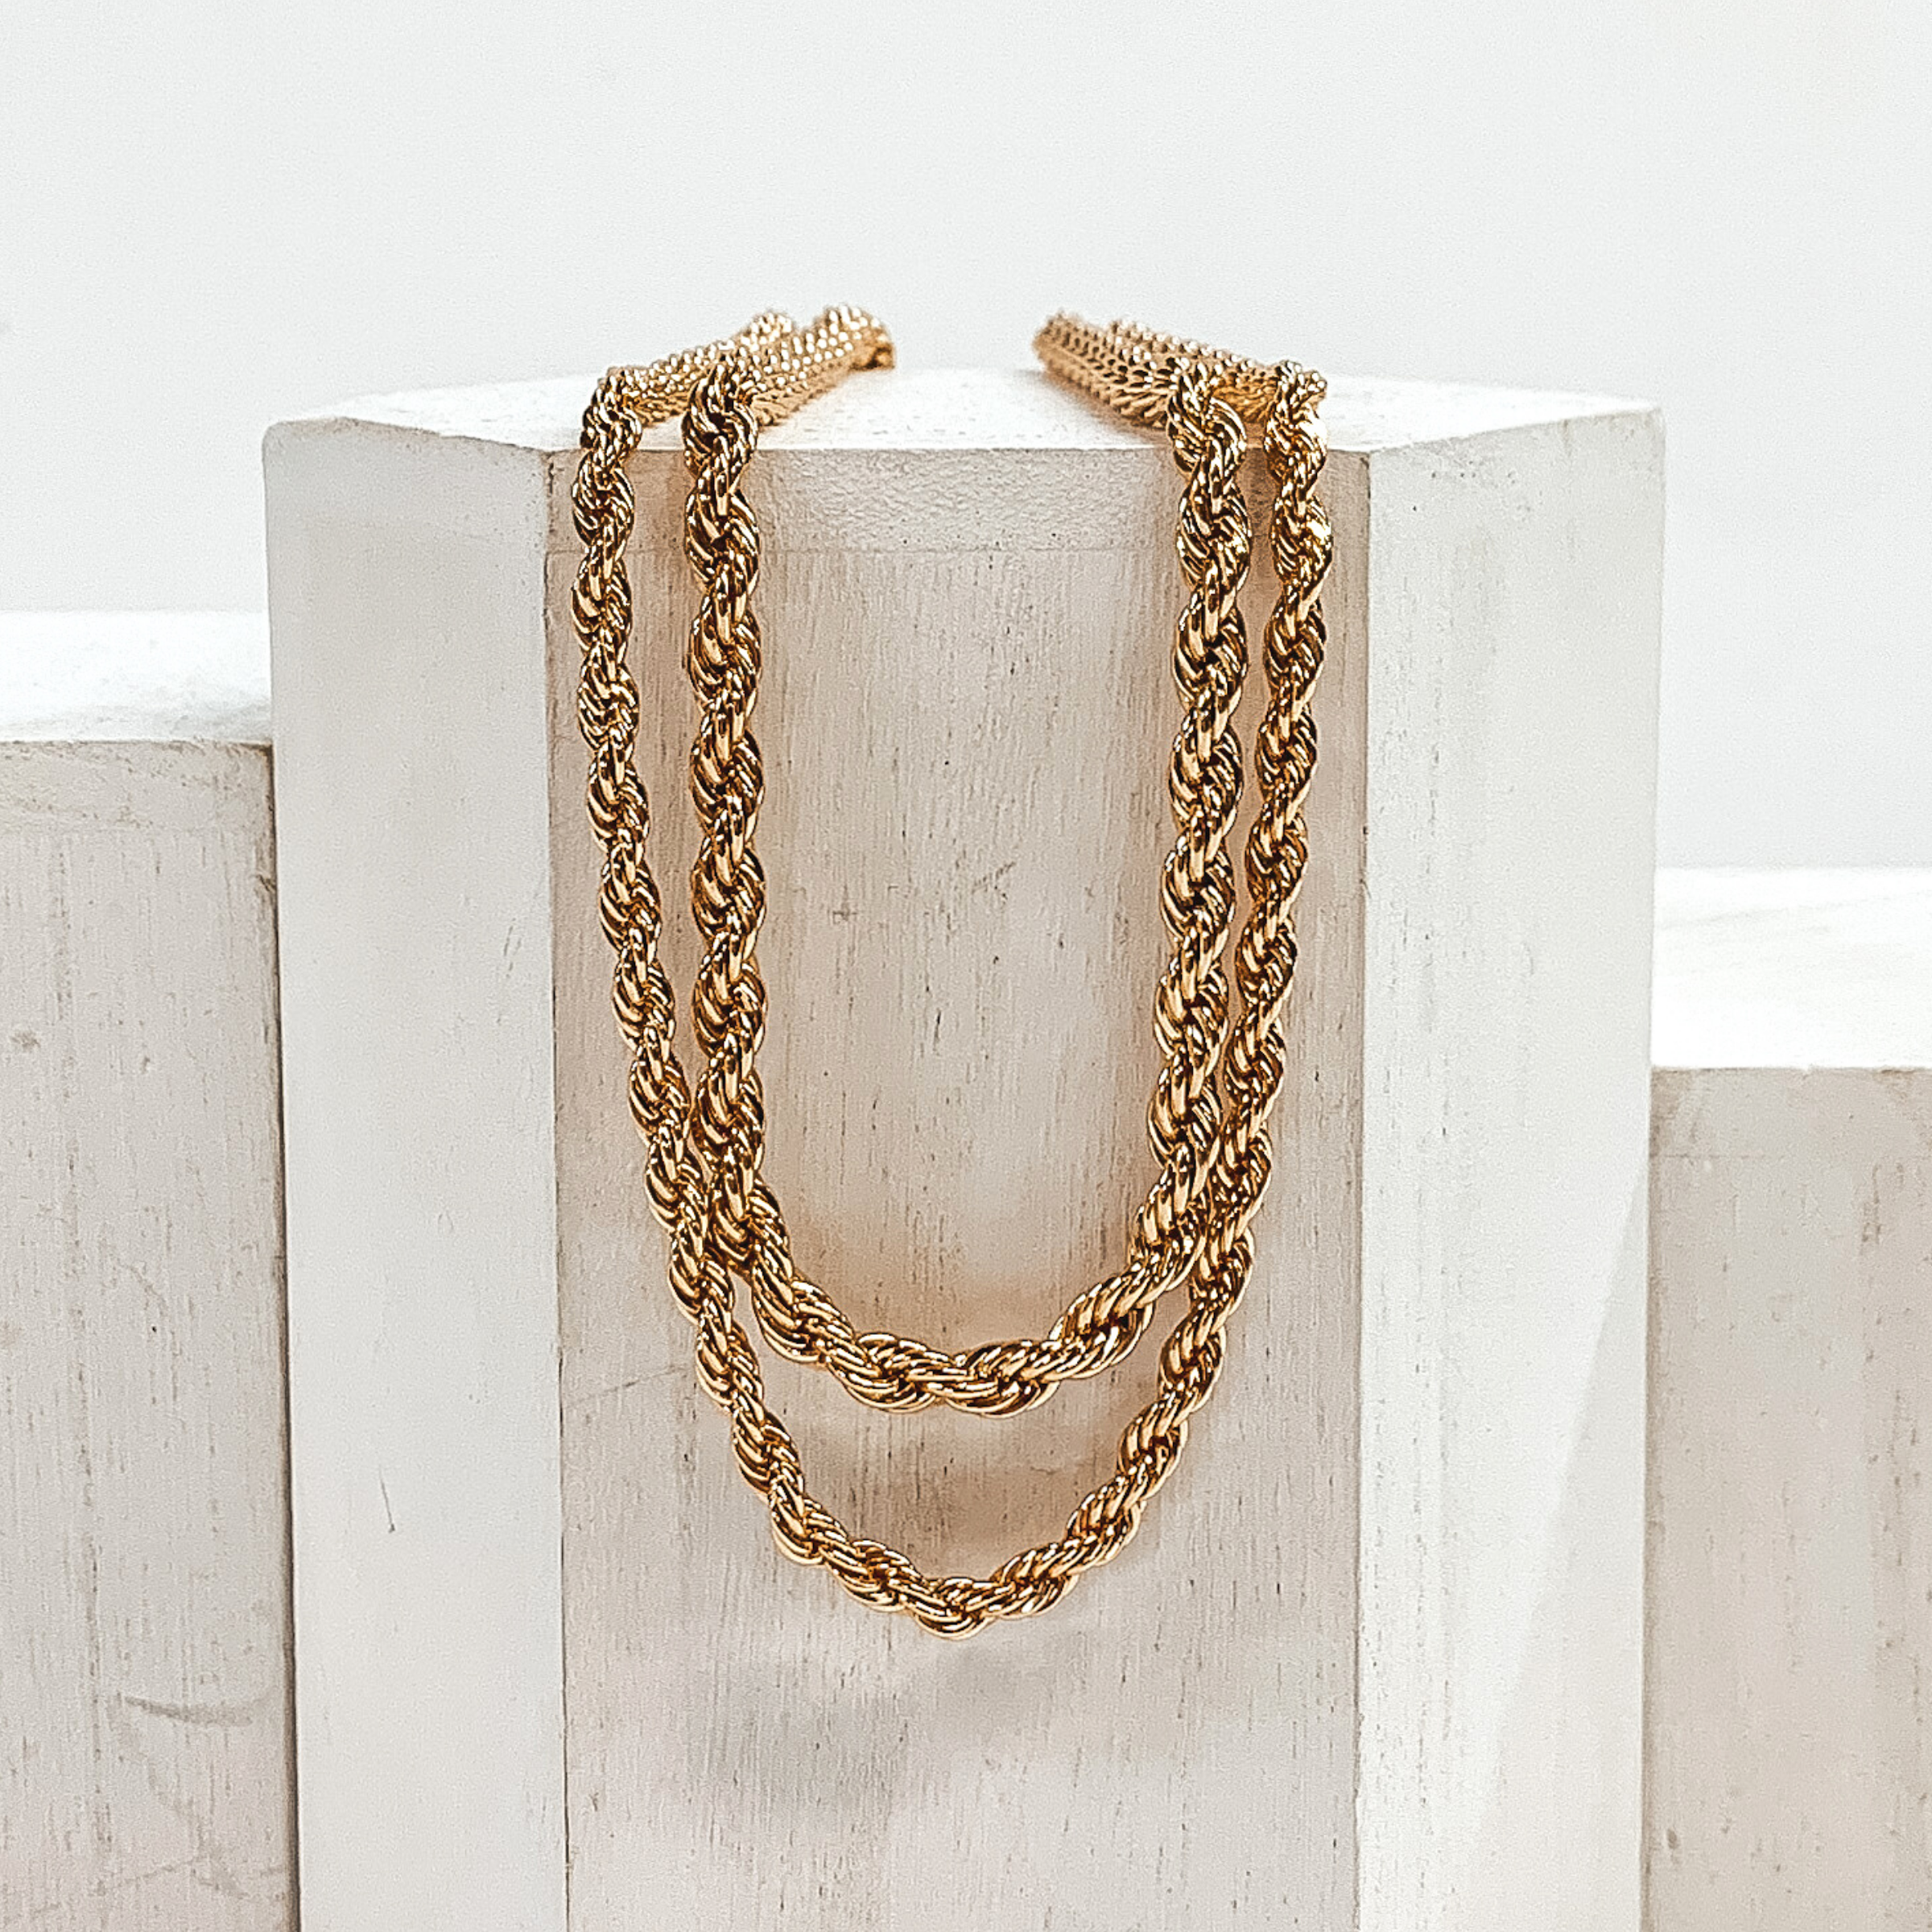 Two, gold, rope chain necklaces. This set includes a shorter and a longer necklace. This necklace is pictured laying on a white block on a white background.